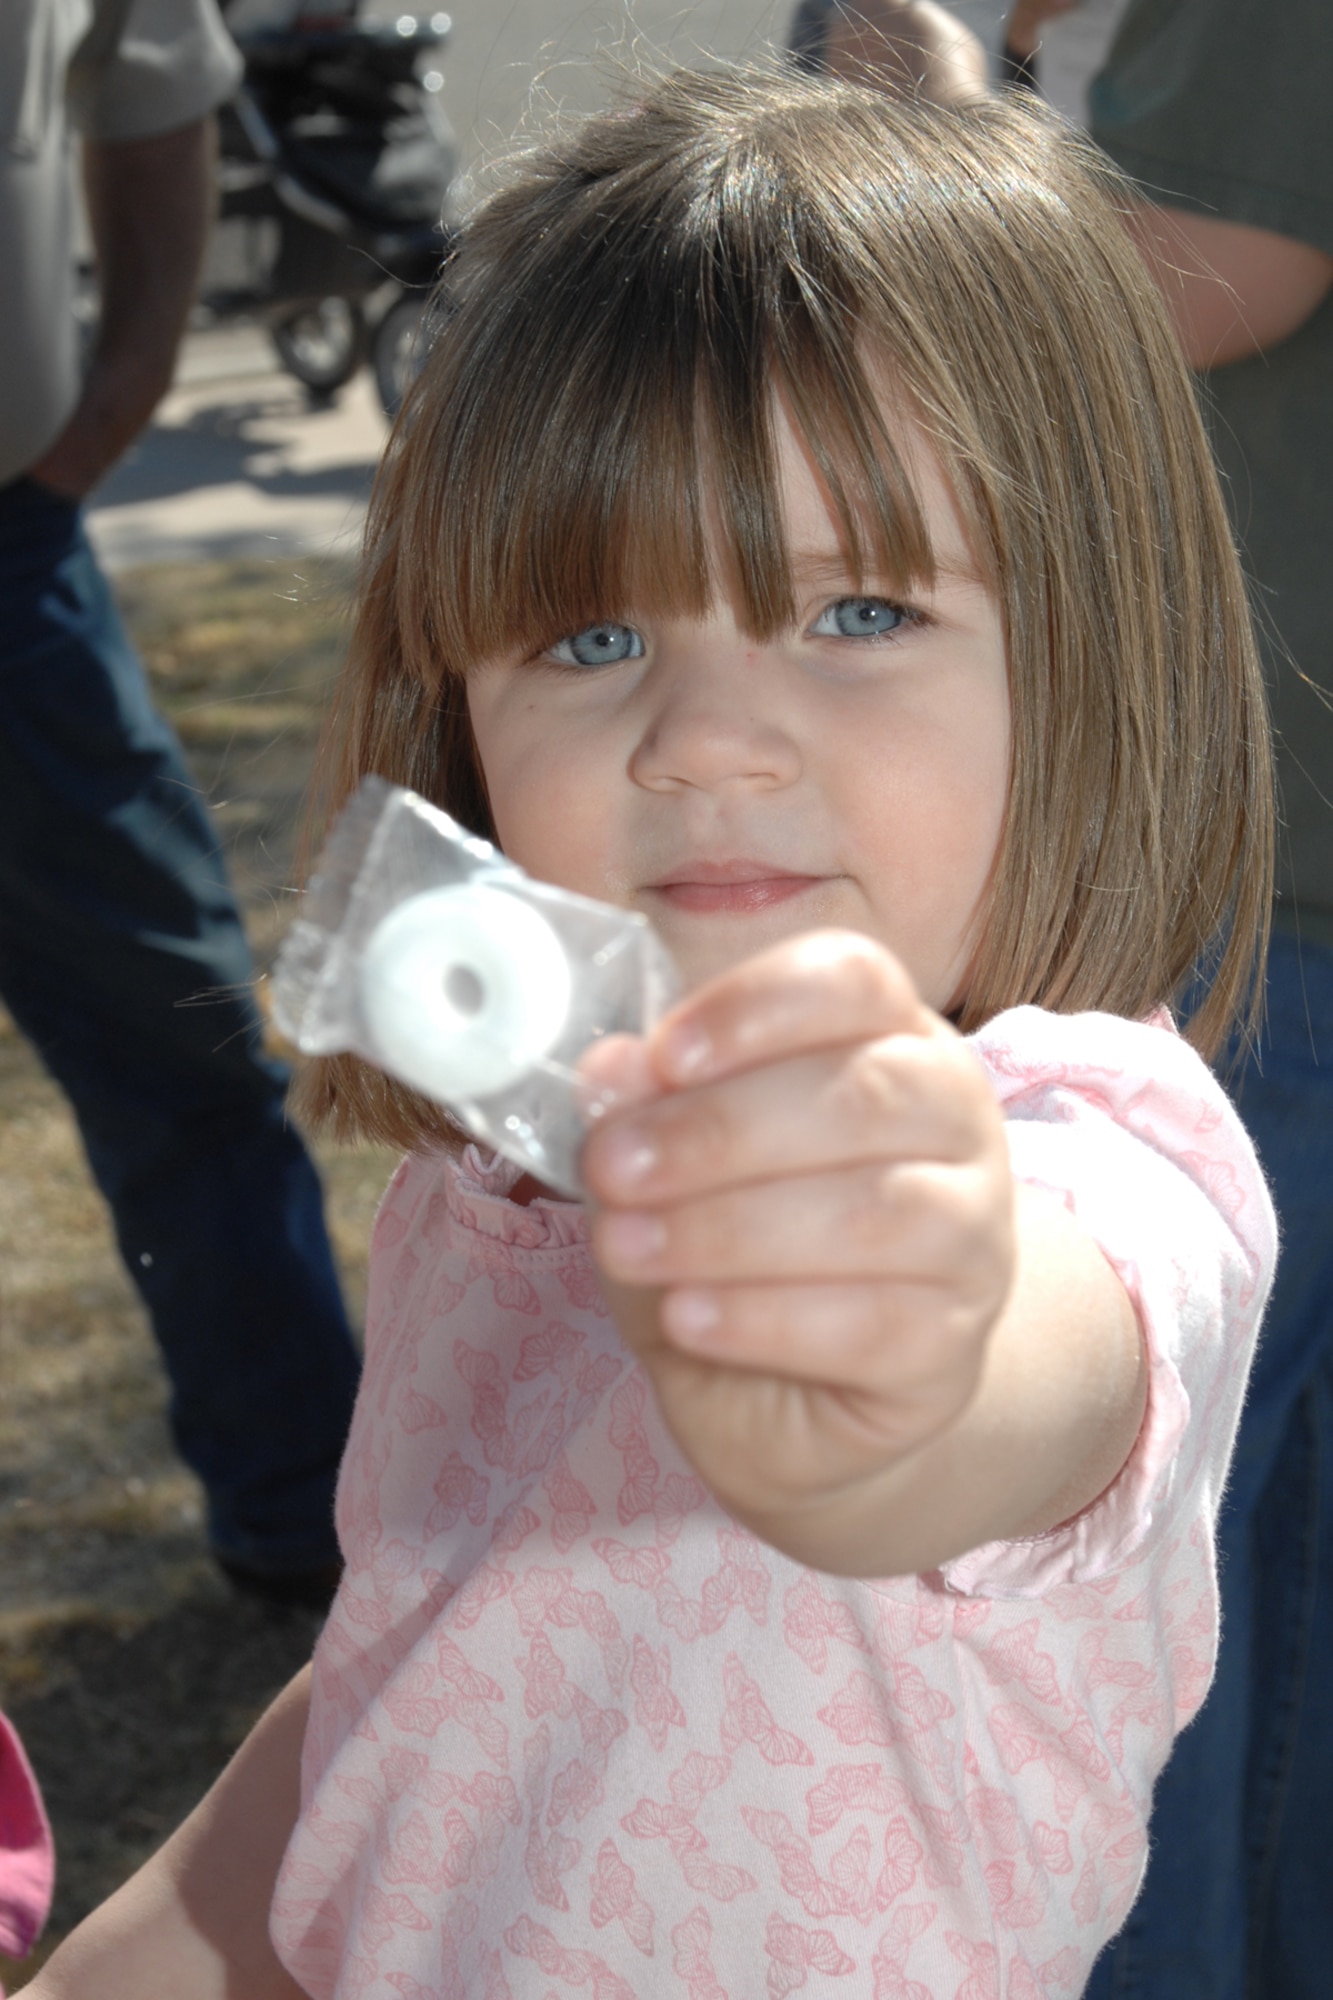 Destyn Neely, 3, shares a treat during the Base Wide Easter Egg Hunt March 22 at Holloman Air Force Base, N.M. Destyn is the daughter of Tech. Sgt. Dustyn Neely, 49th Maintenance Squadron. (U.S. Air Force photo/Airman 1st Class Jamal D. Sutter)